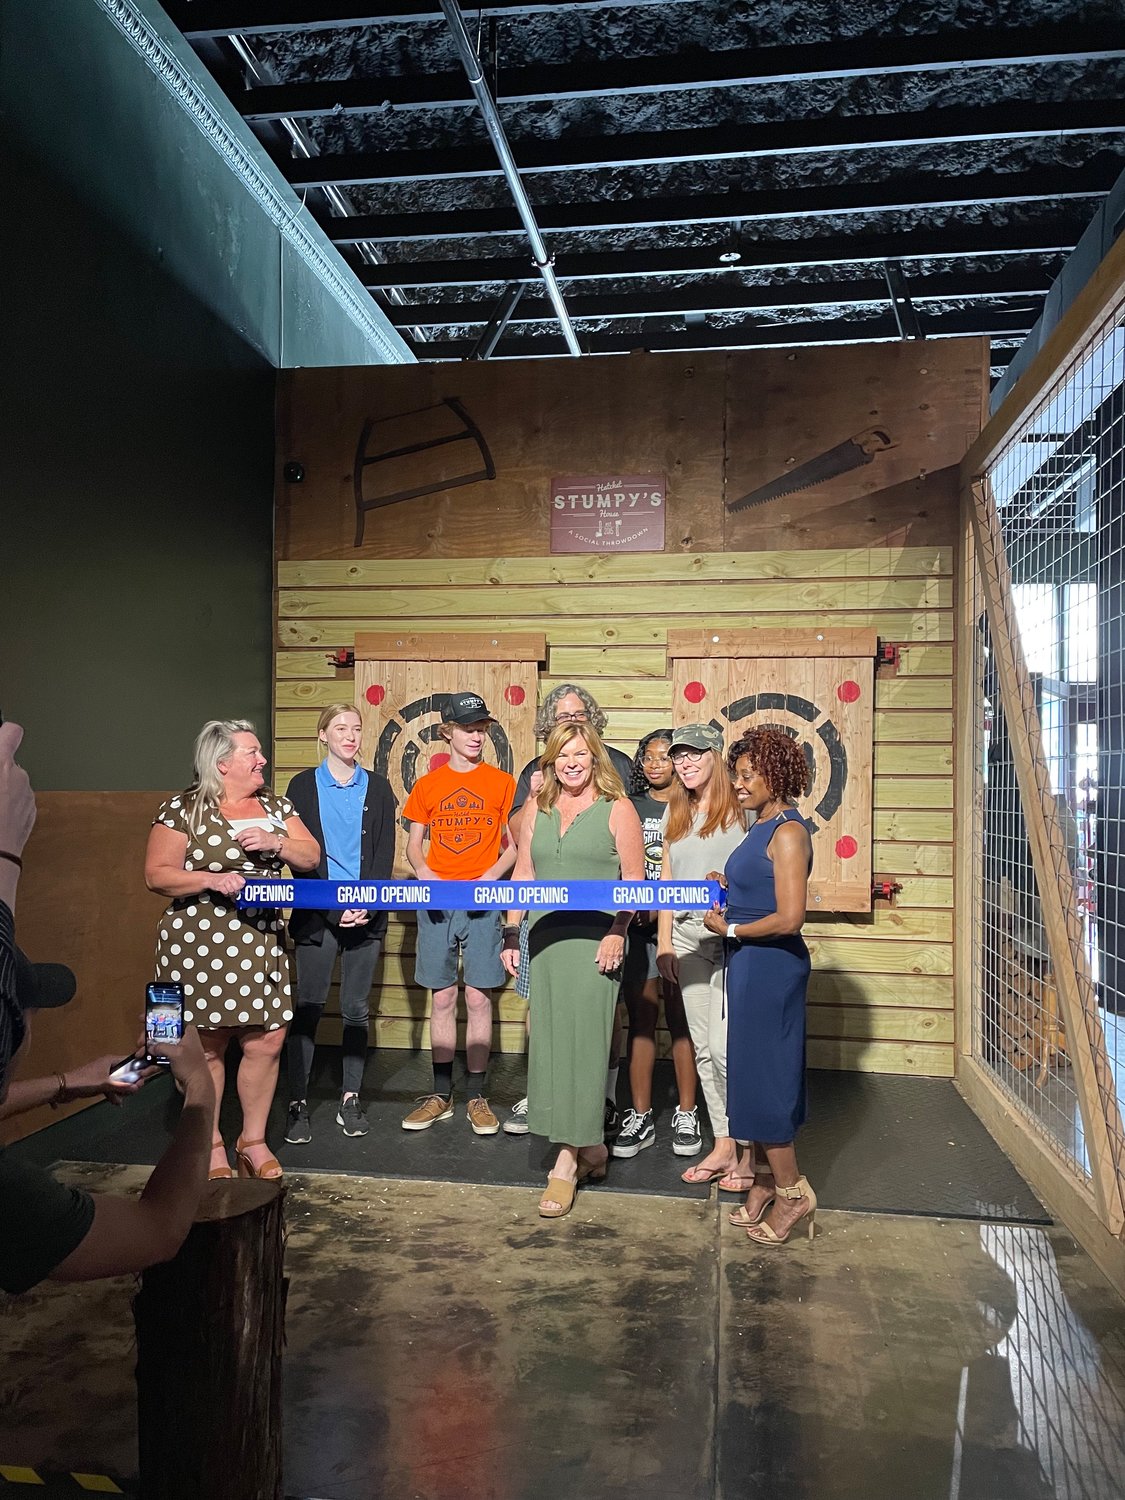 Stumpy’s Hatchet House recently held a ceremony to open its 32nd location nationally and first in Jacksonville.